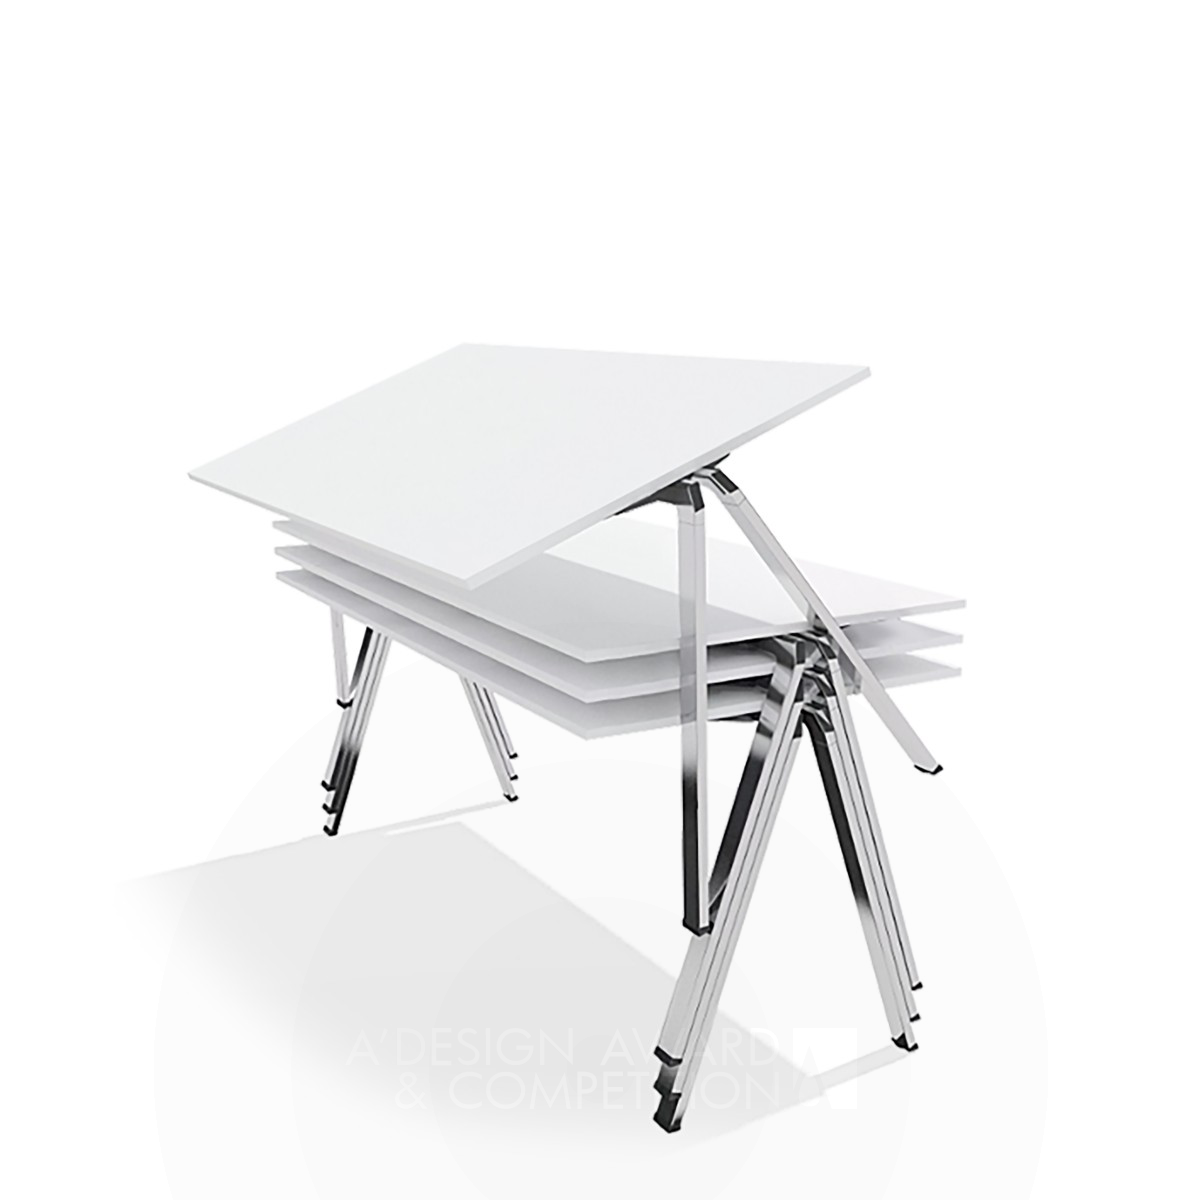 yuno multifunctional stacking table by Andreas Krob